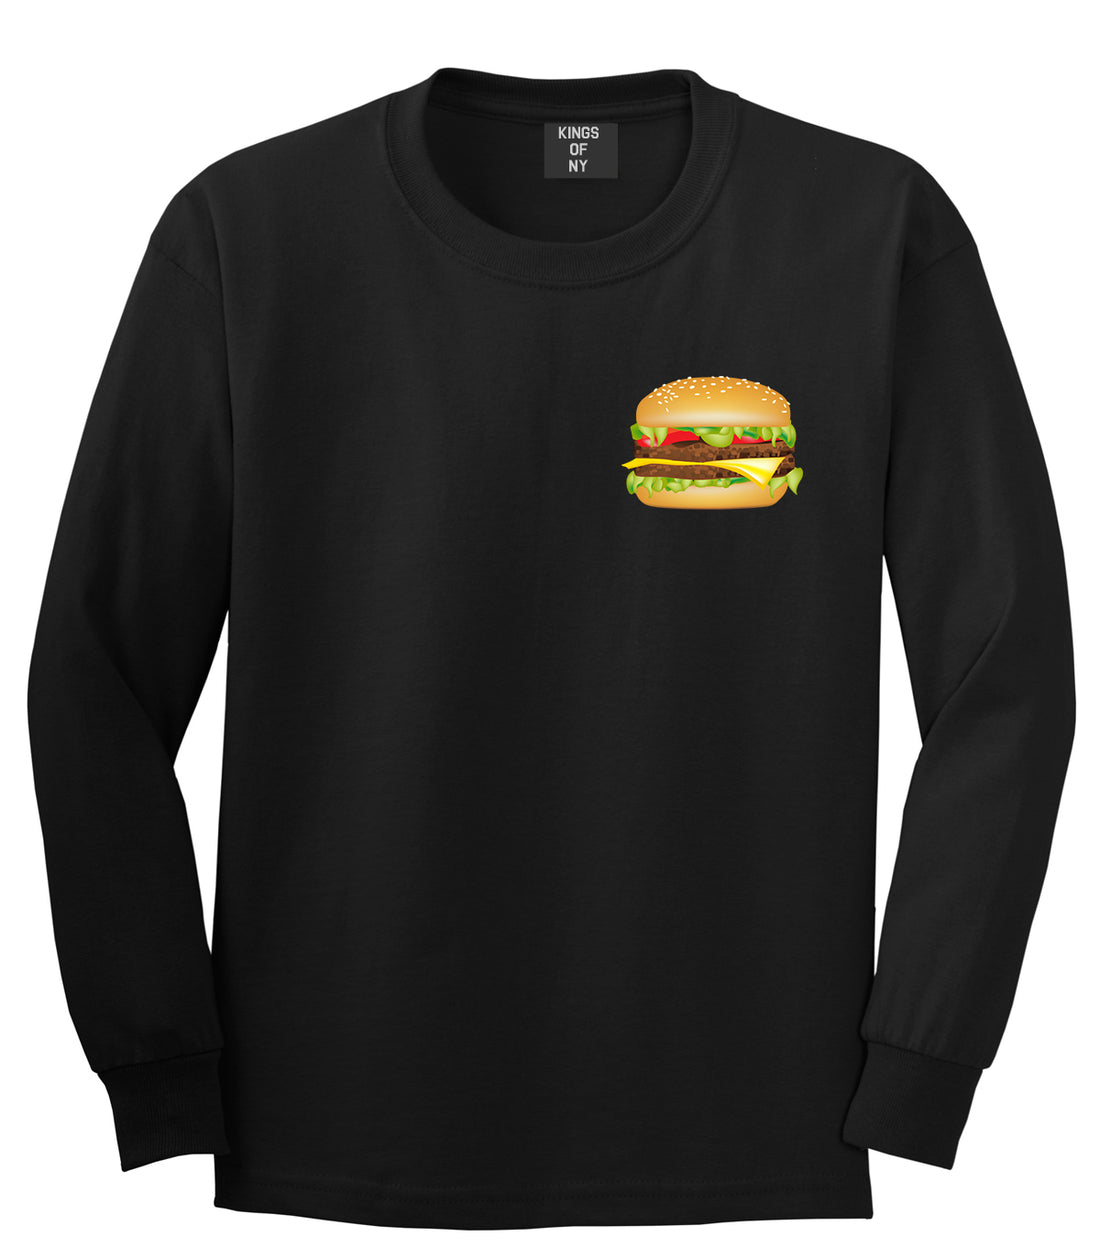 Burger Chest Black Long Sleeve T-Shirt by Kings Of NY